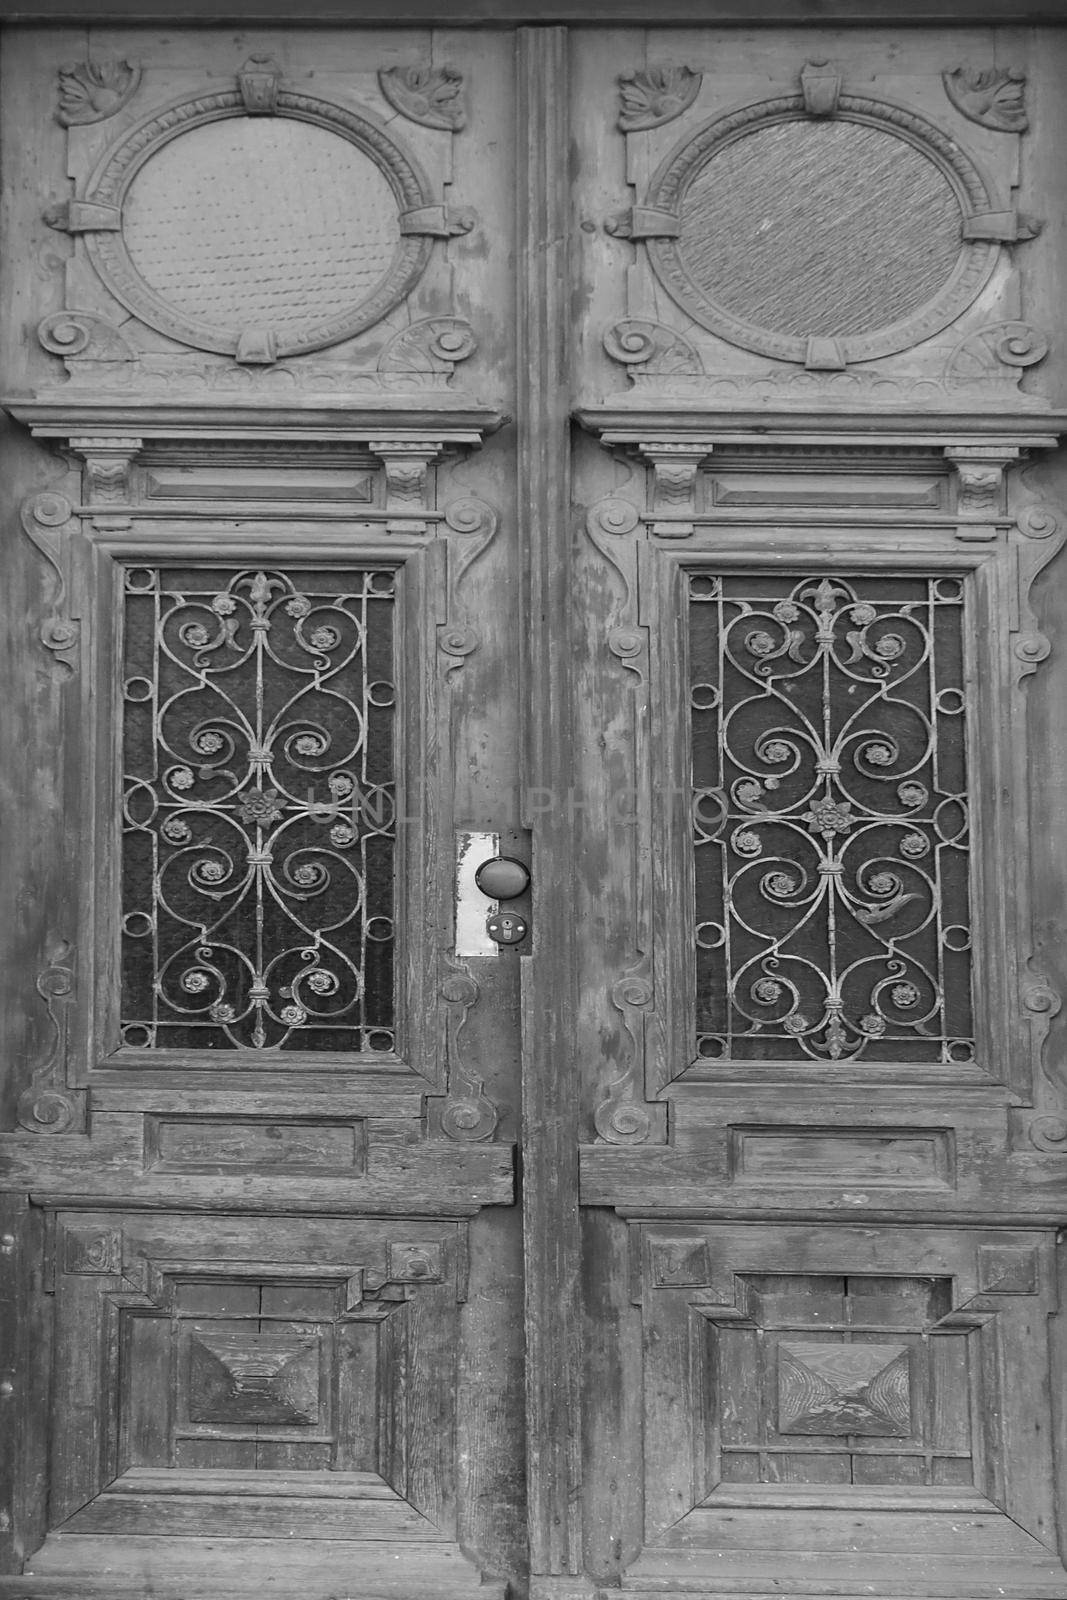 Black and white photo. Old wooden entrance doors